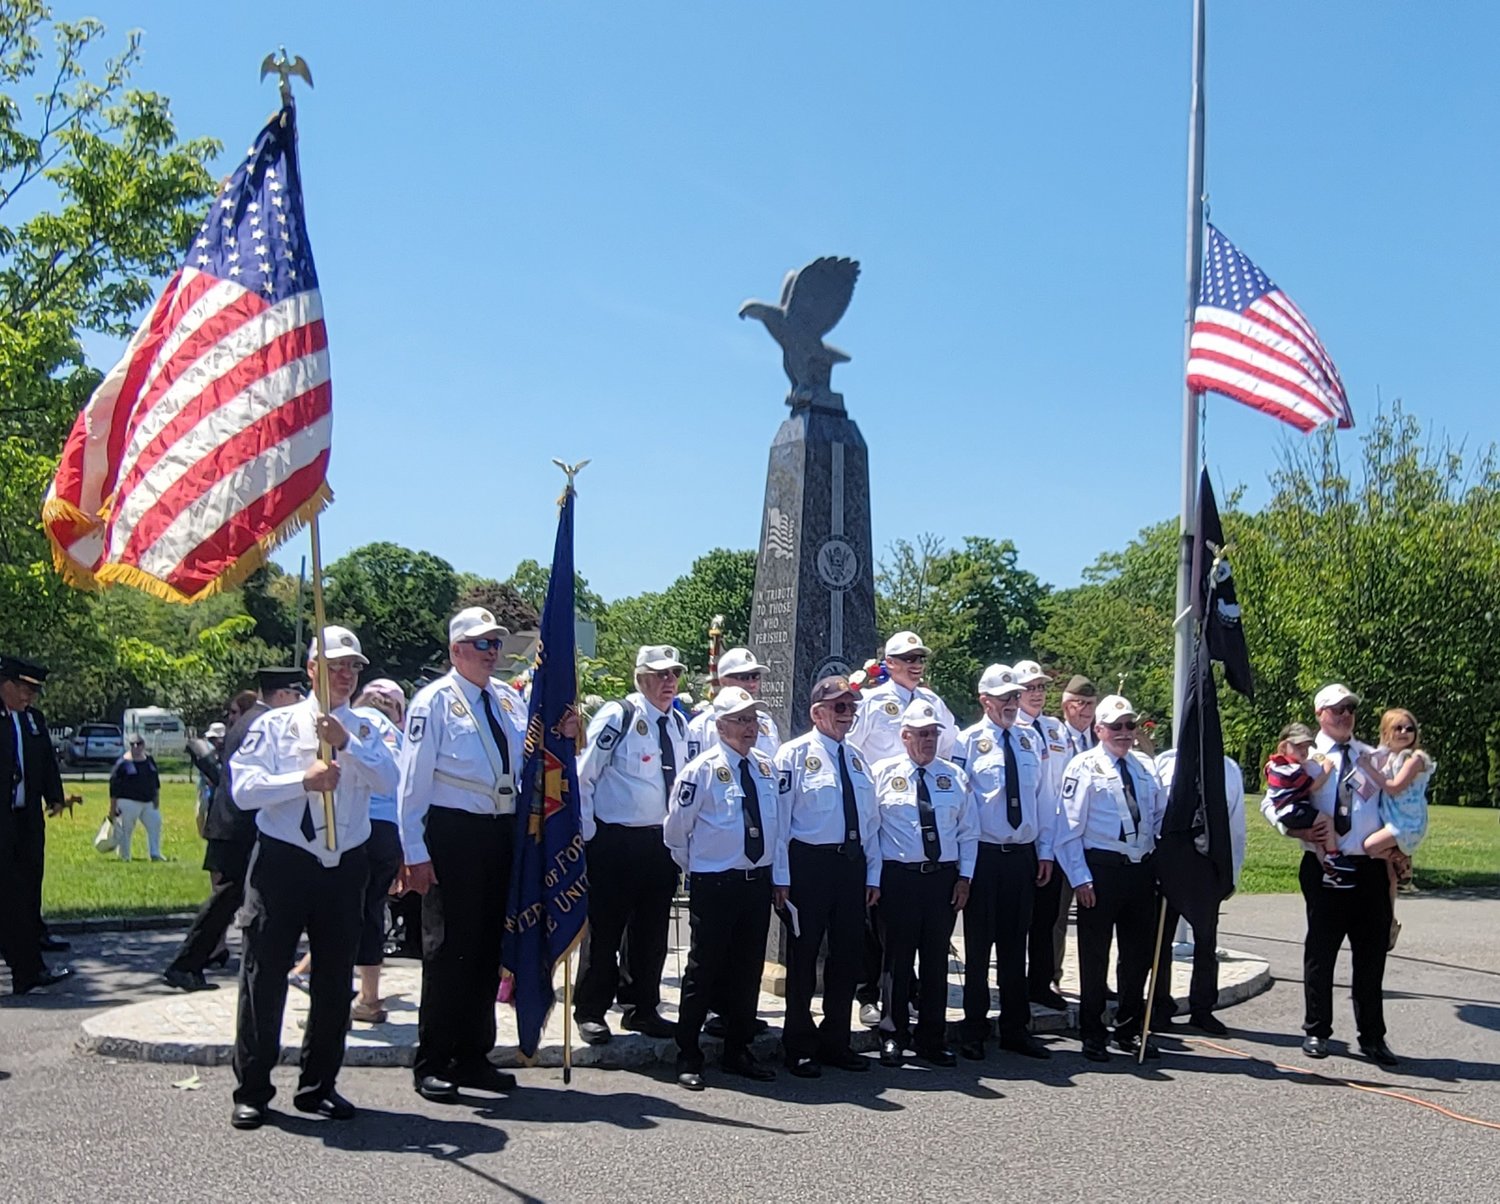 Veterans of Foreign Wars (VFW) 8300 stand in front of the monument commemorating fallen soldiers in Woodland Cemetery.